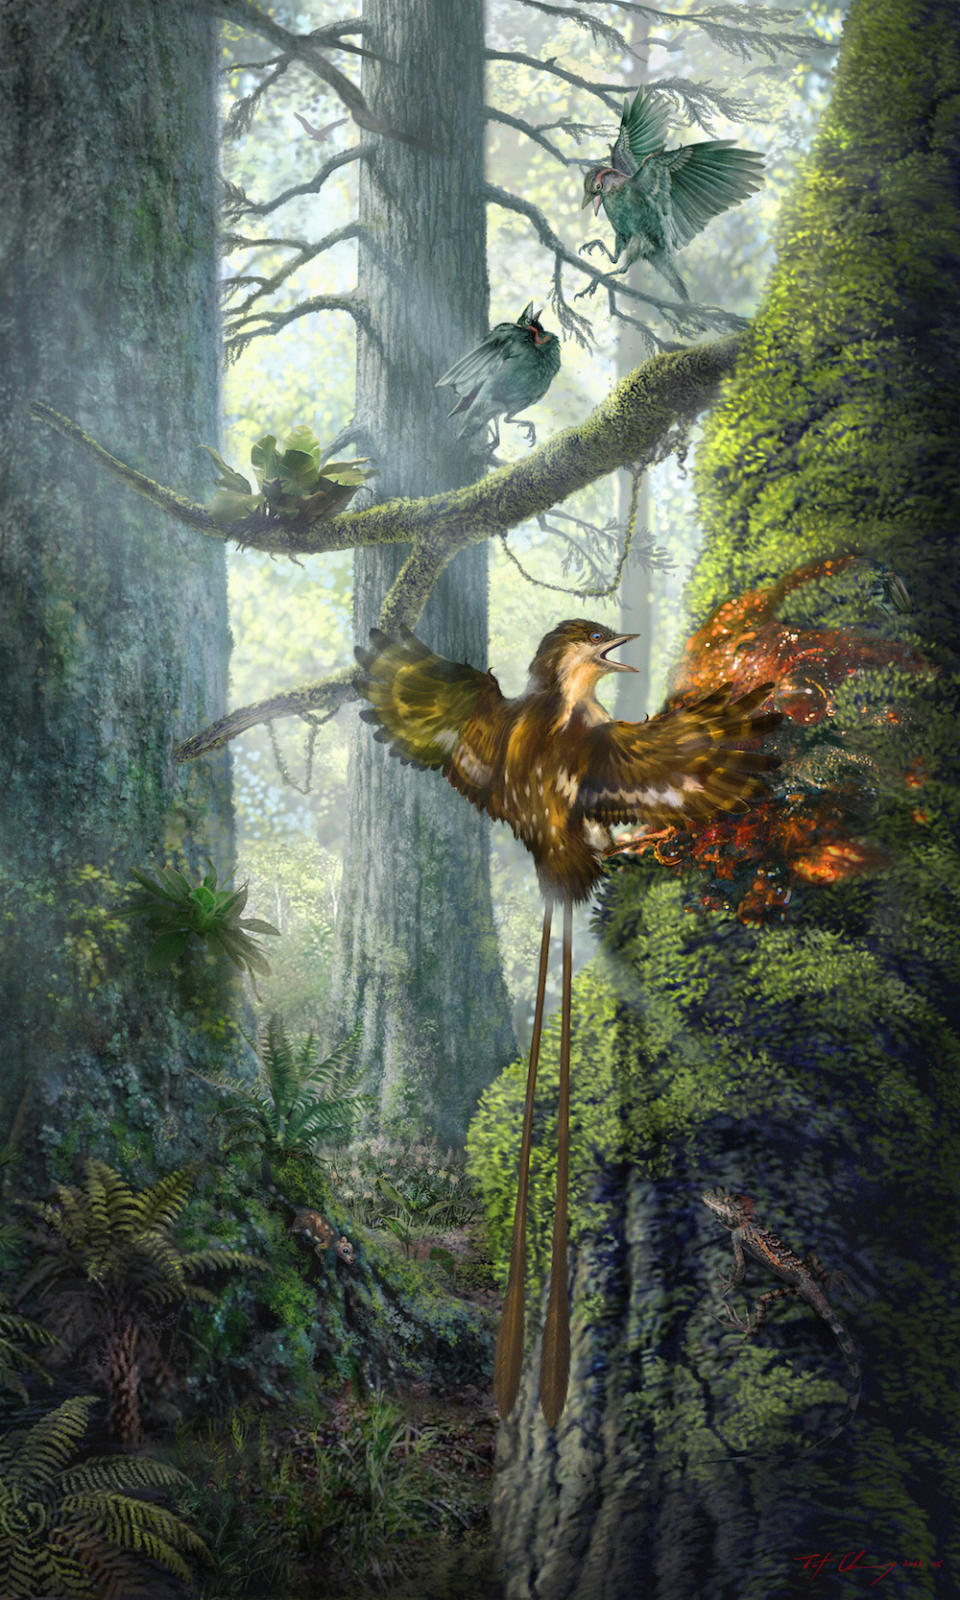 An ancient, hummingbird-size bird got its wing stuck in sticky tree resin and likely struggled for its life about 99 million years ago. Researchers nicknamed this specimen "Angel Wing."